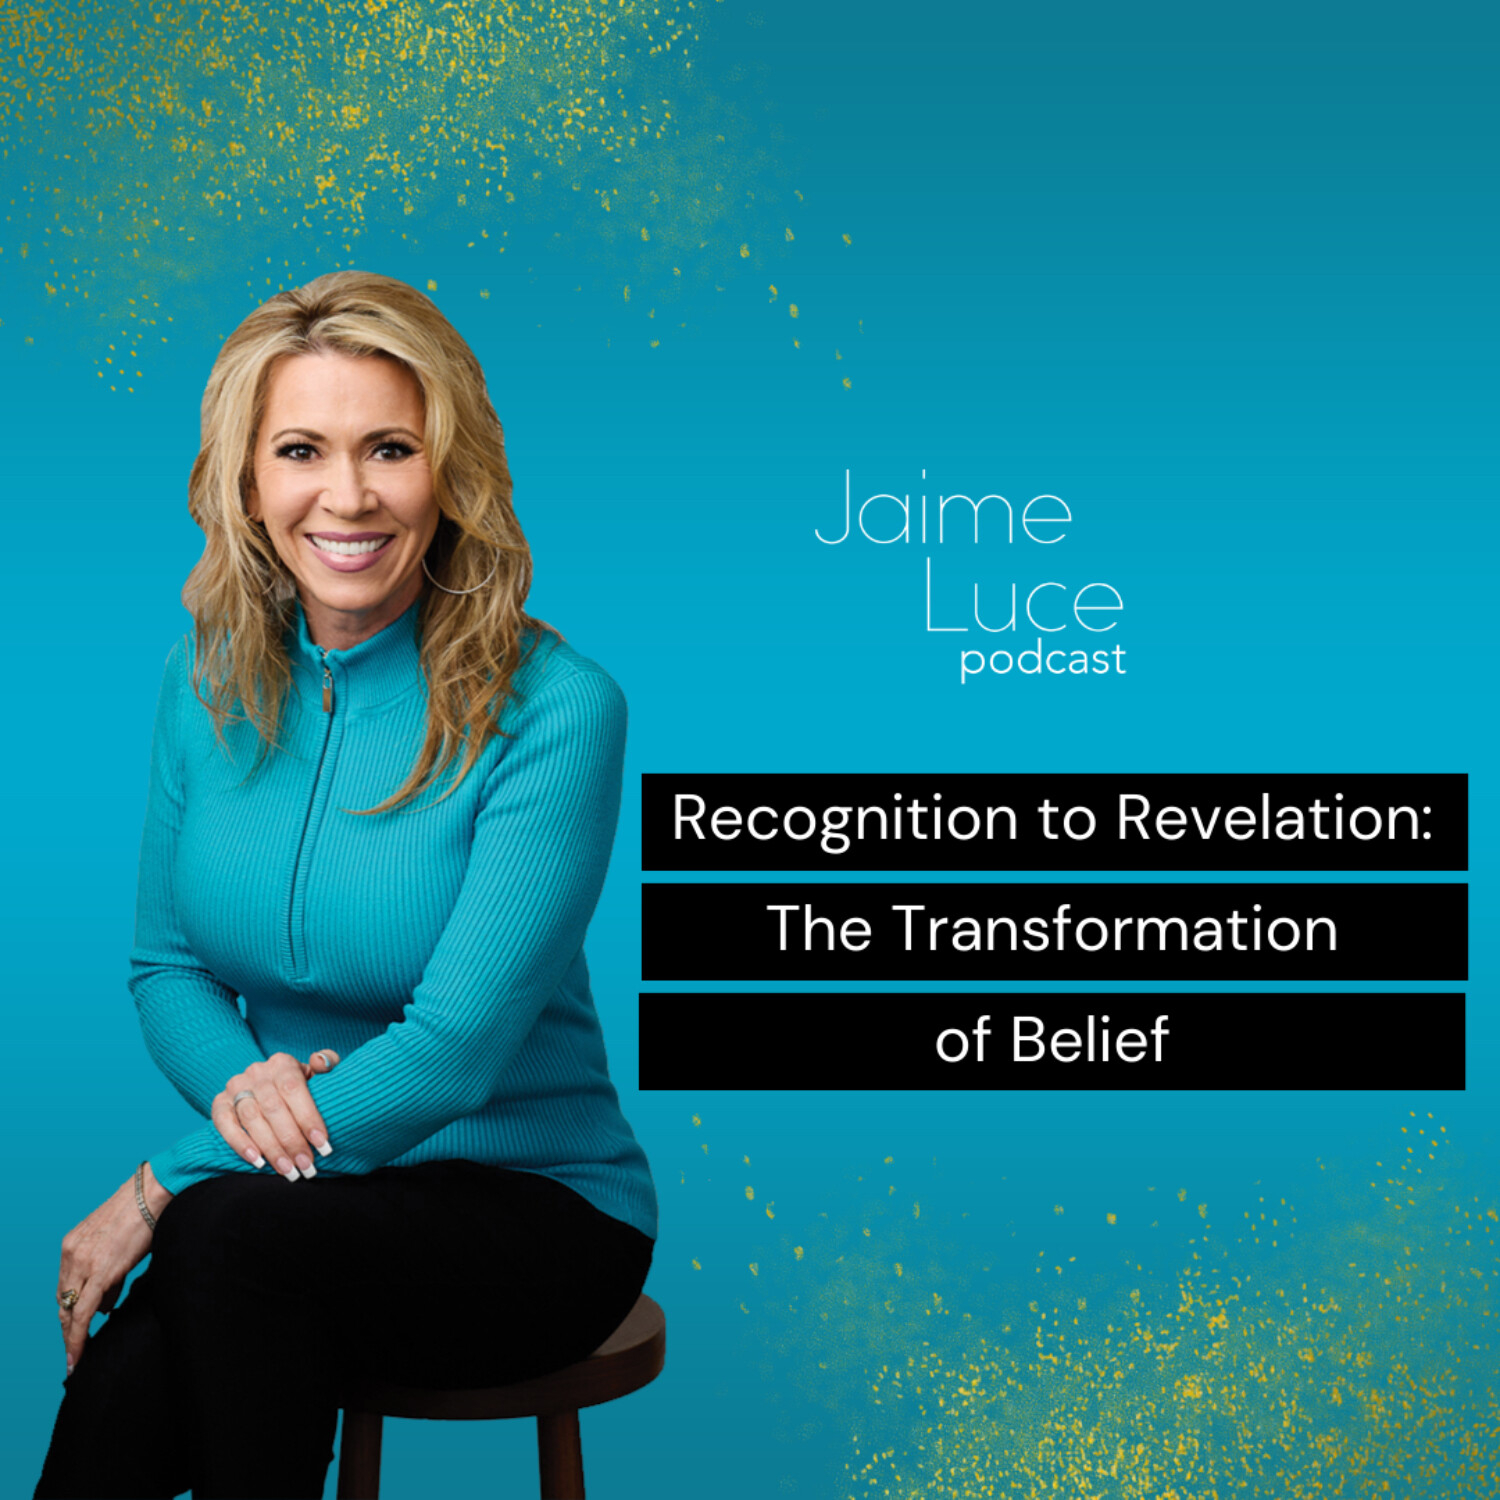 Recognition to Revelation: The Transformation of Belief